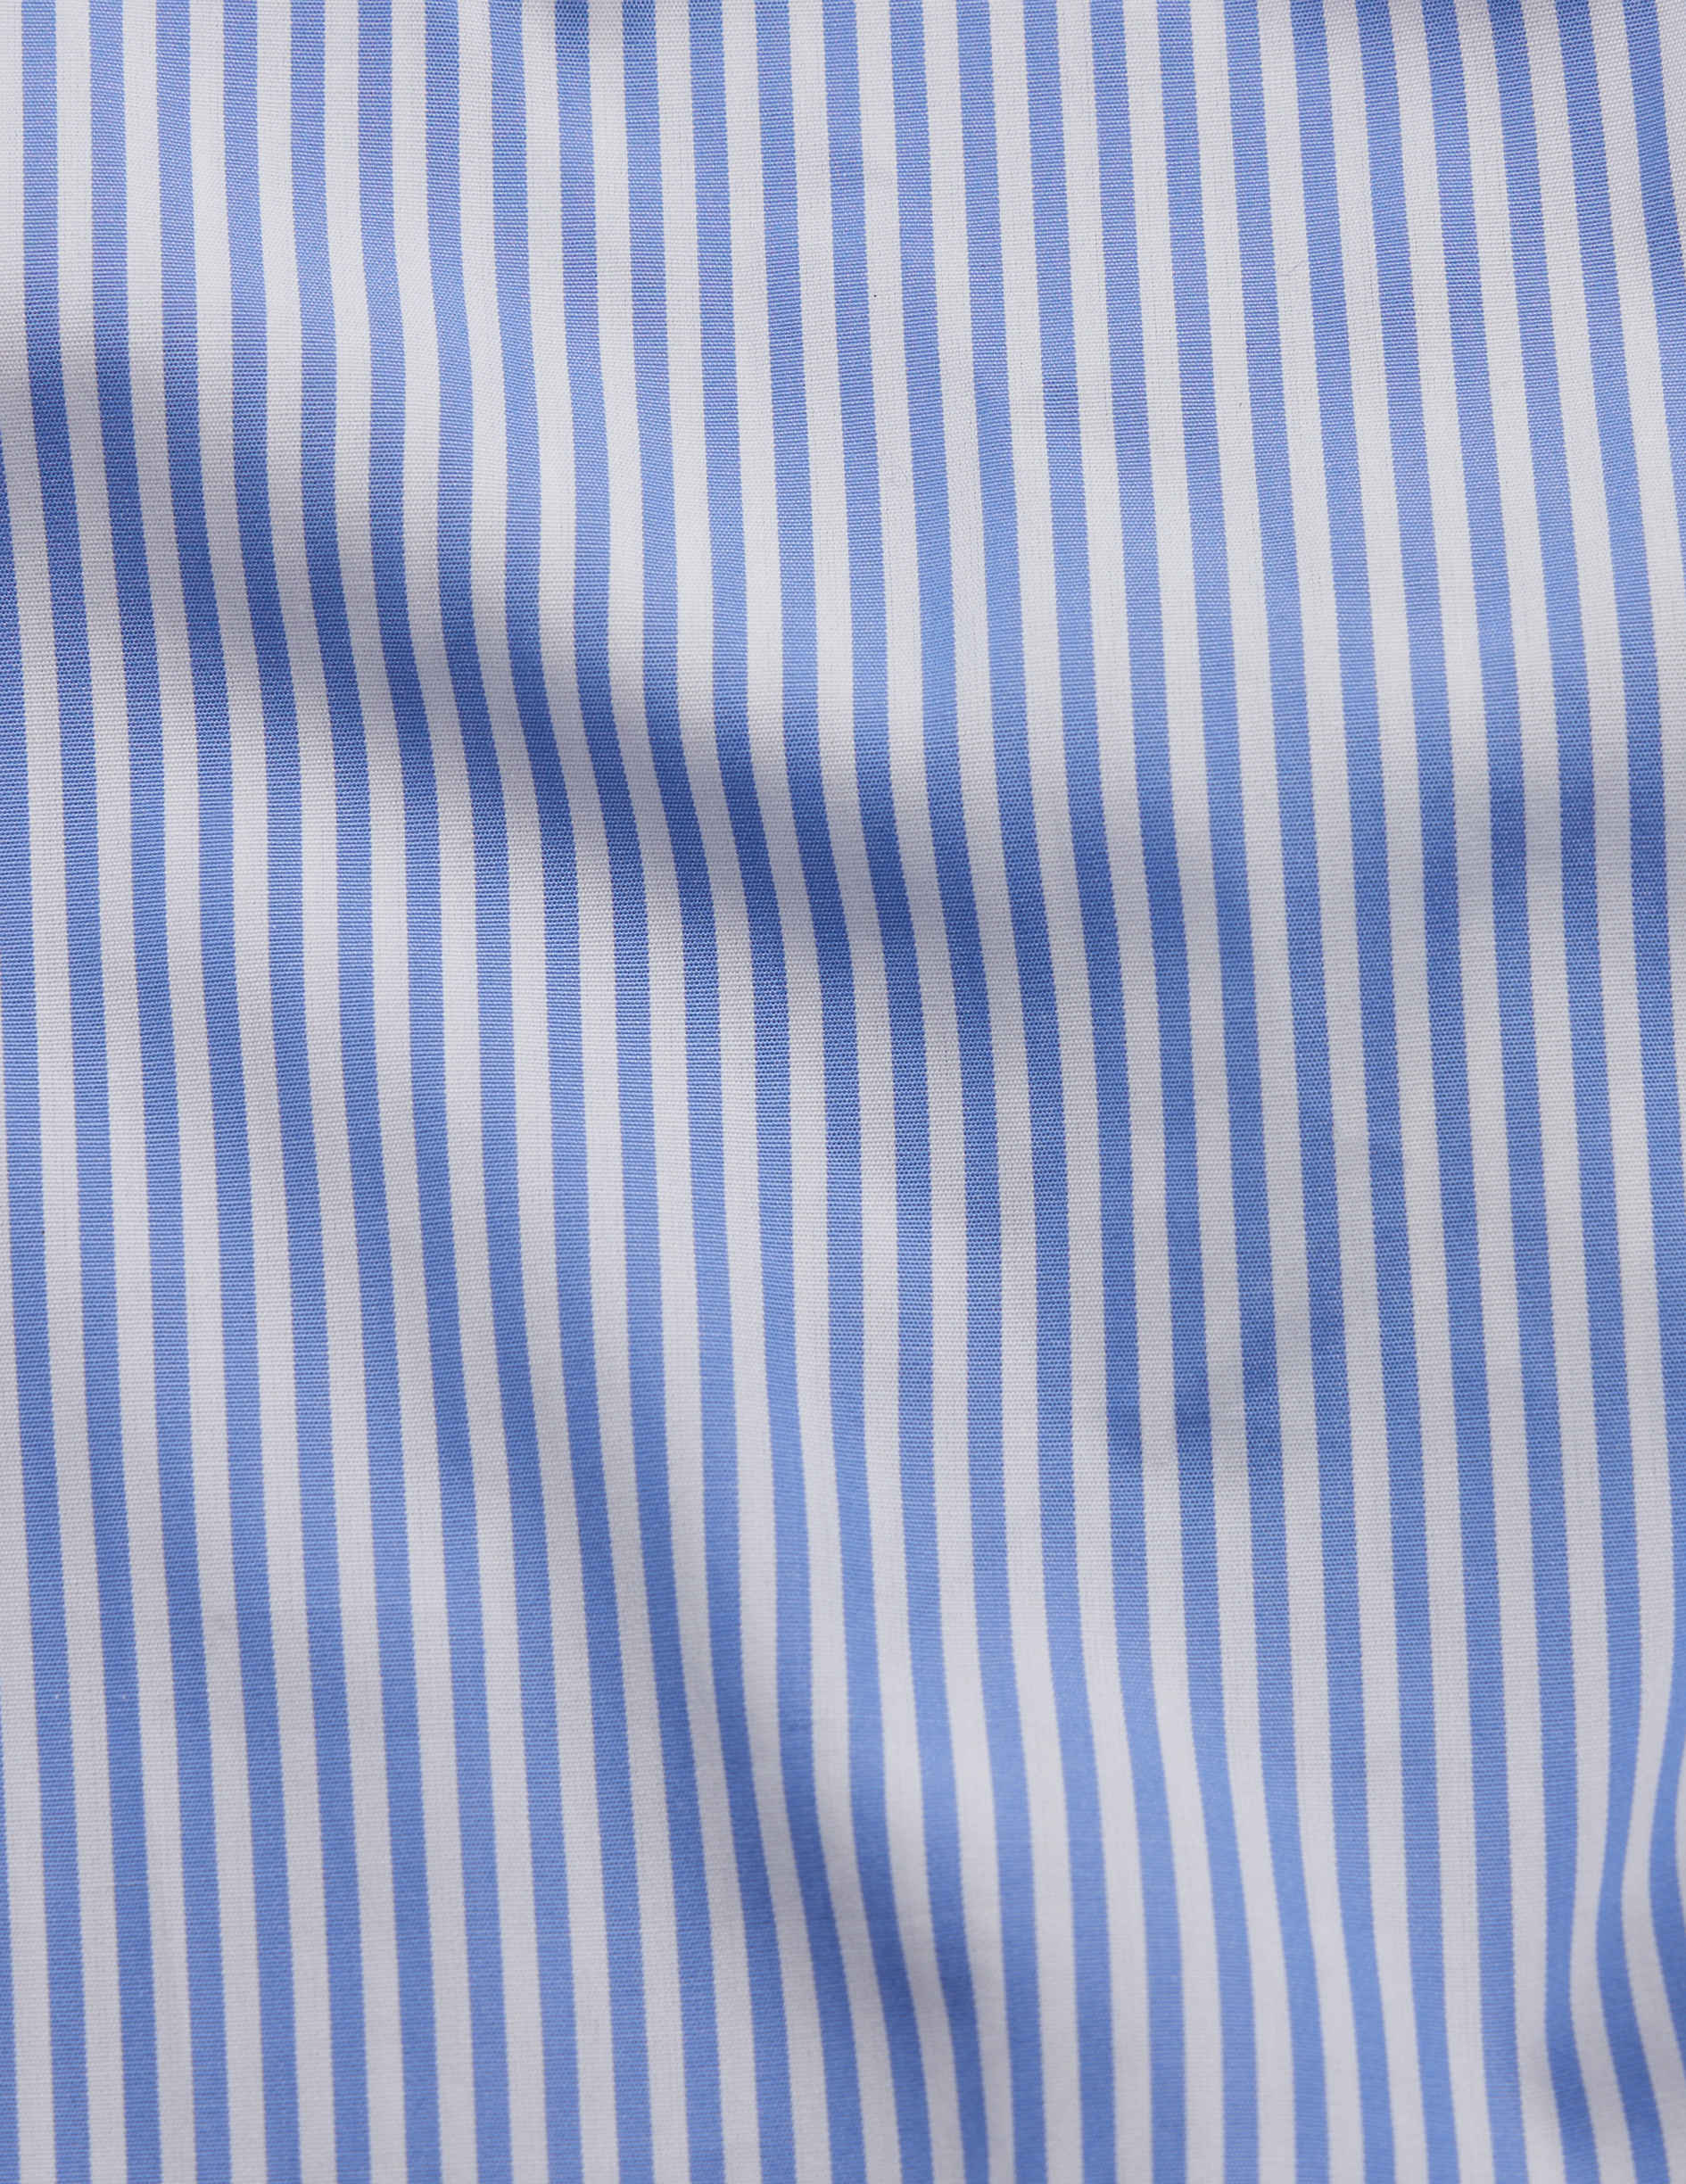 Blue striped "Je t'aime" shirt with navy embroidery - Poplin - Figaret Collar